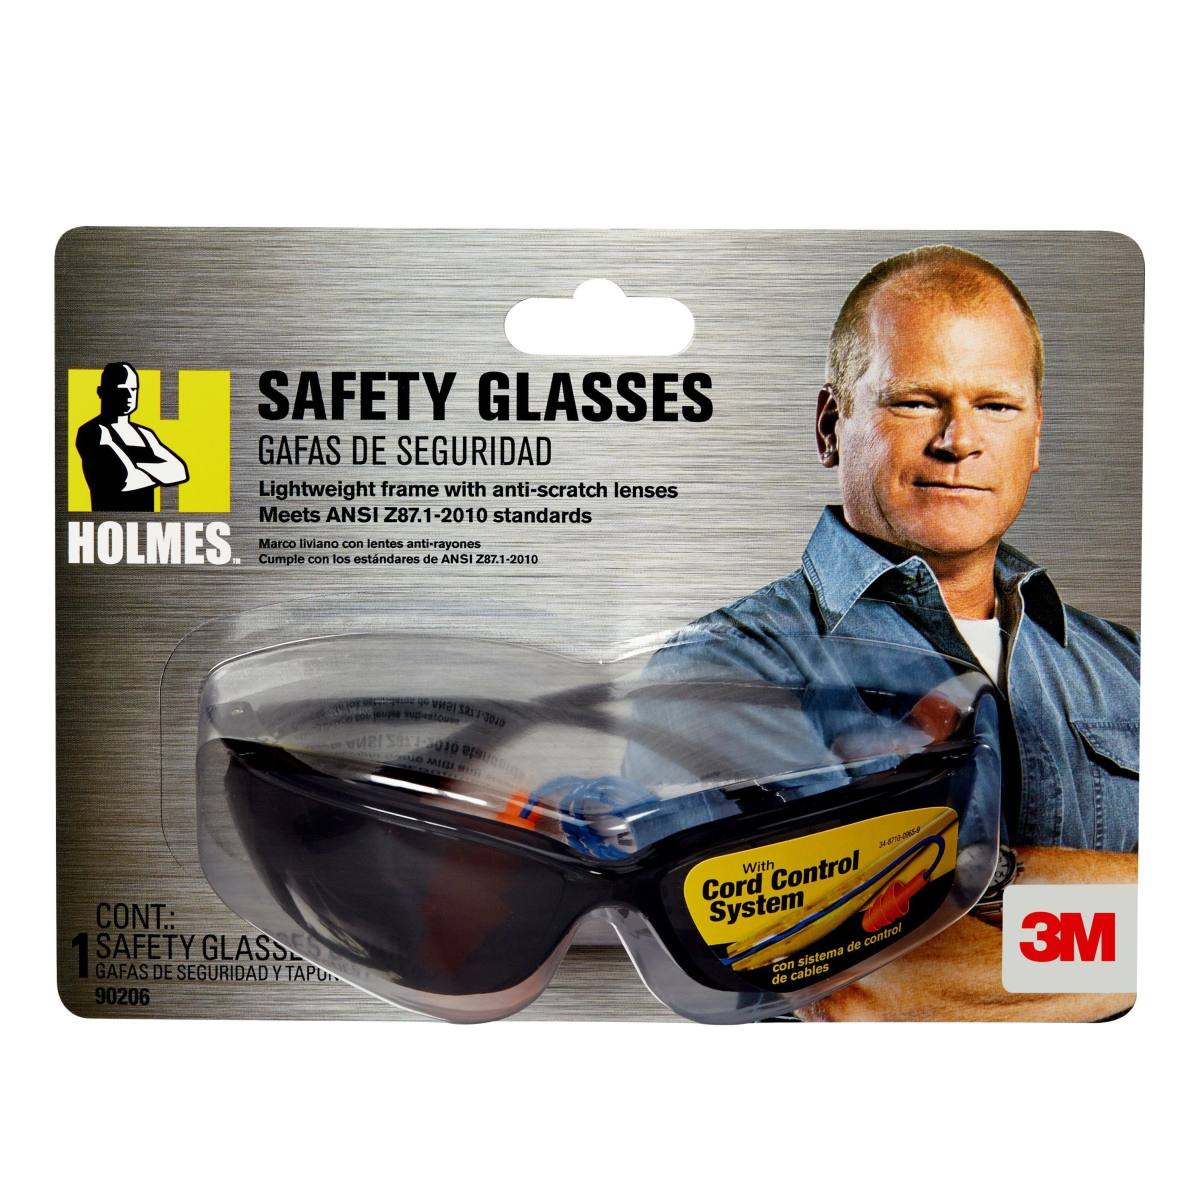 3M Display case for safety spectacles, black, 3M logo